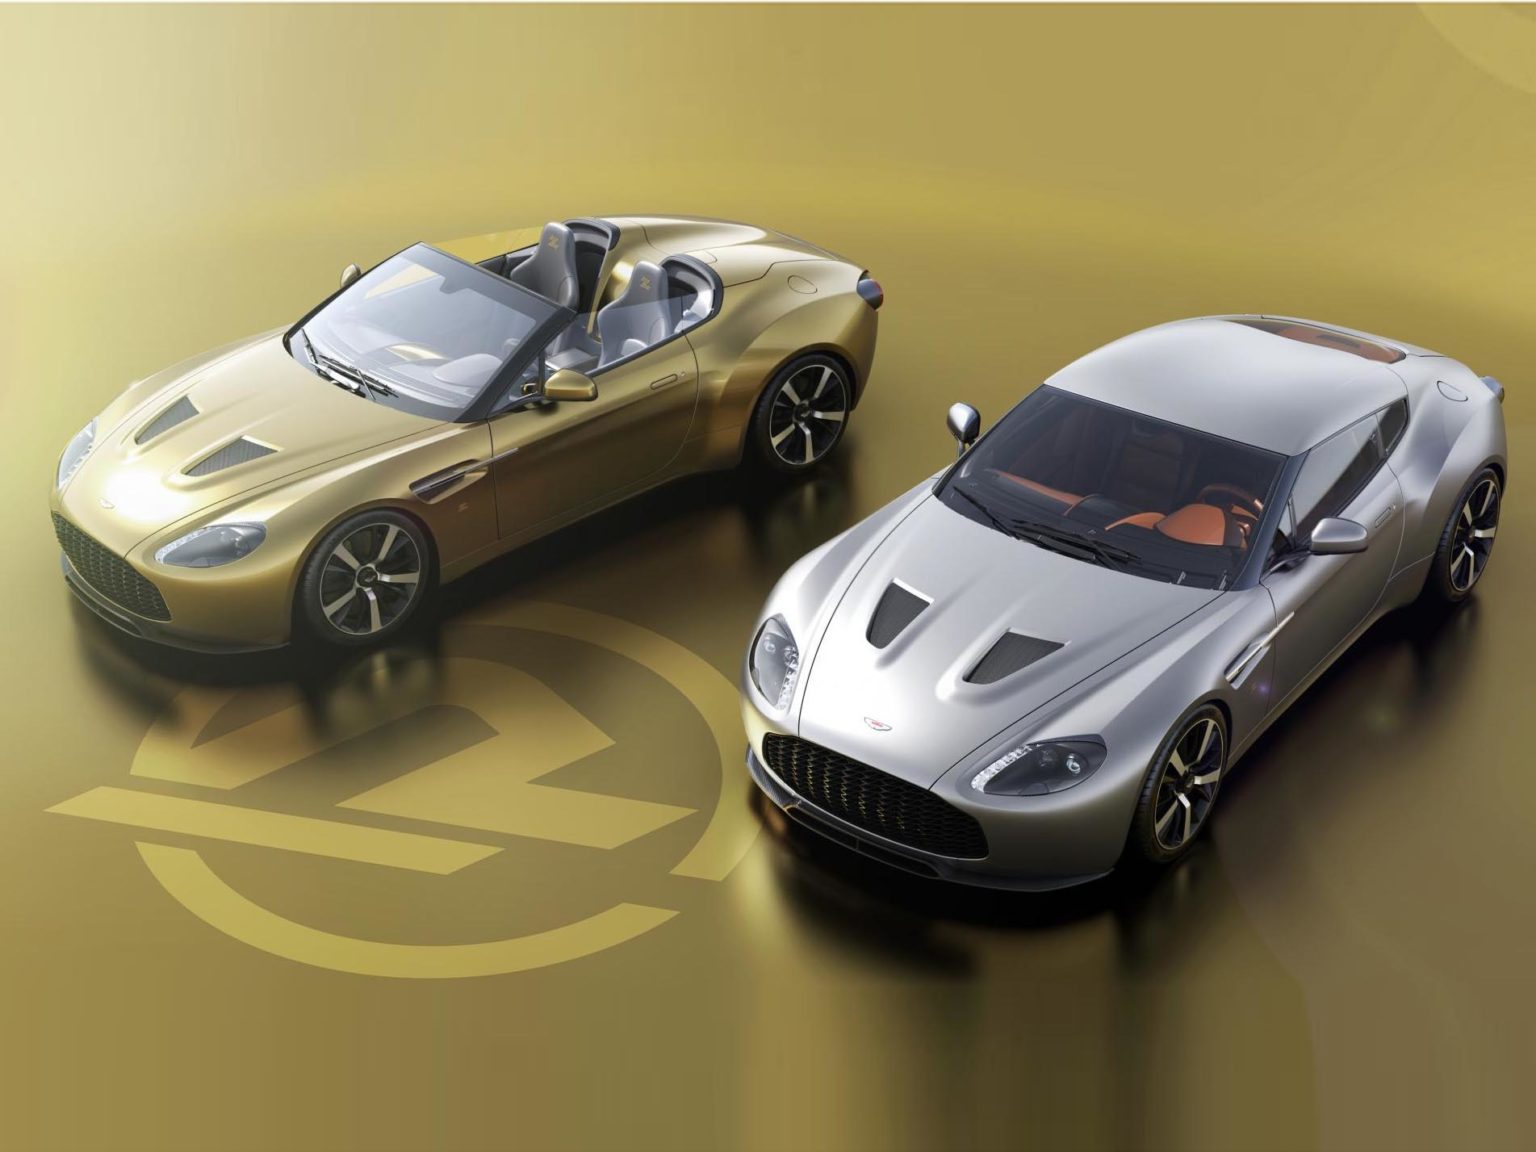 R-Reforge is hand-crafting 19 pairs of Aston Martin Vantage V12 Zagato Heritage Twins.